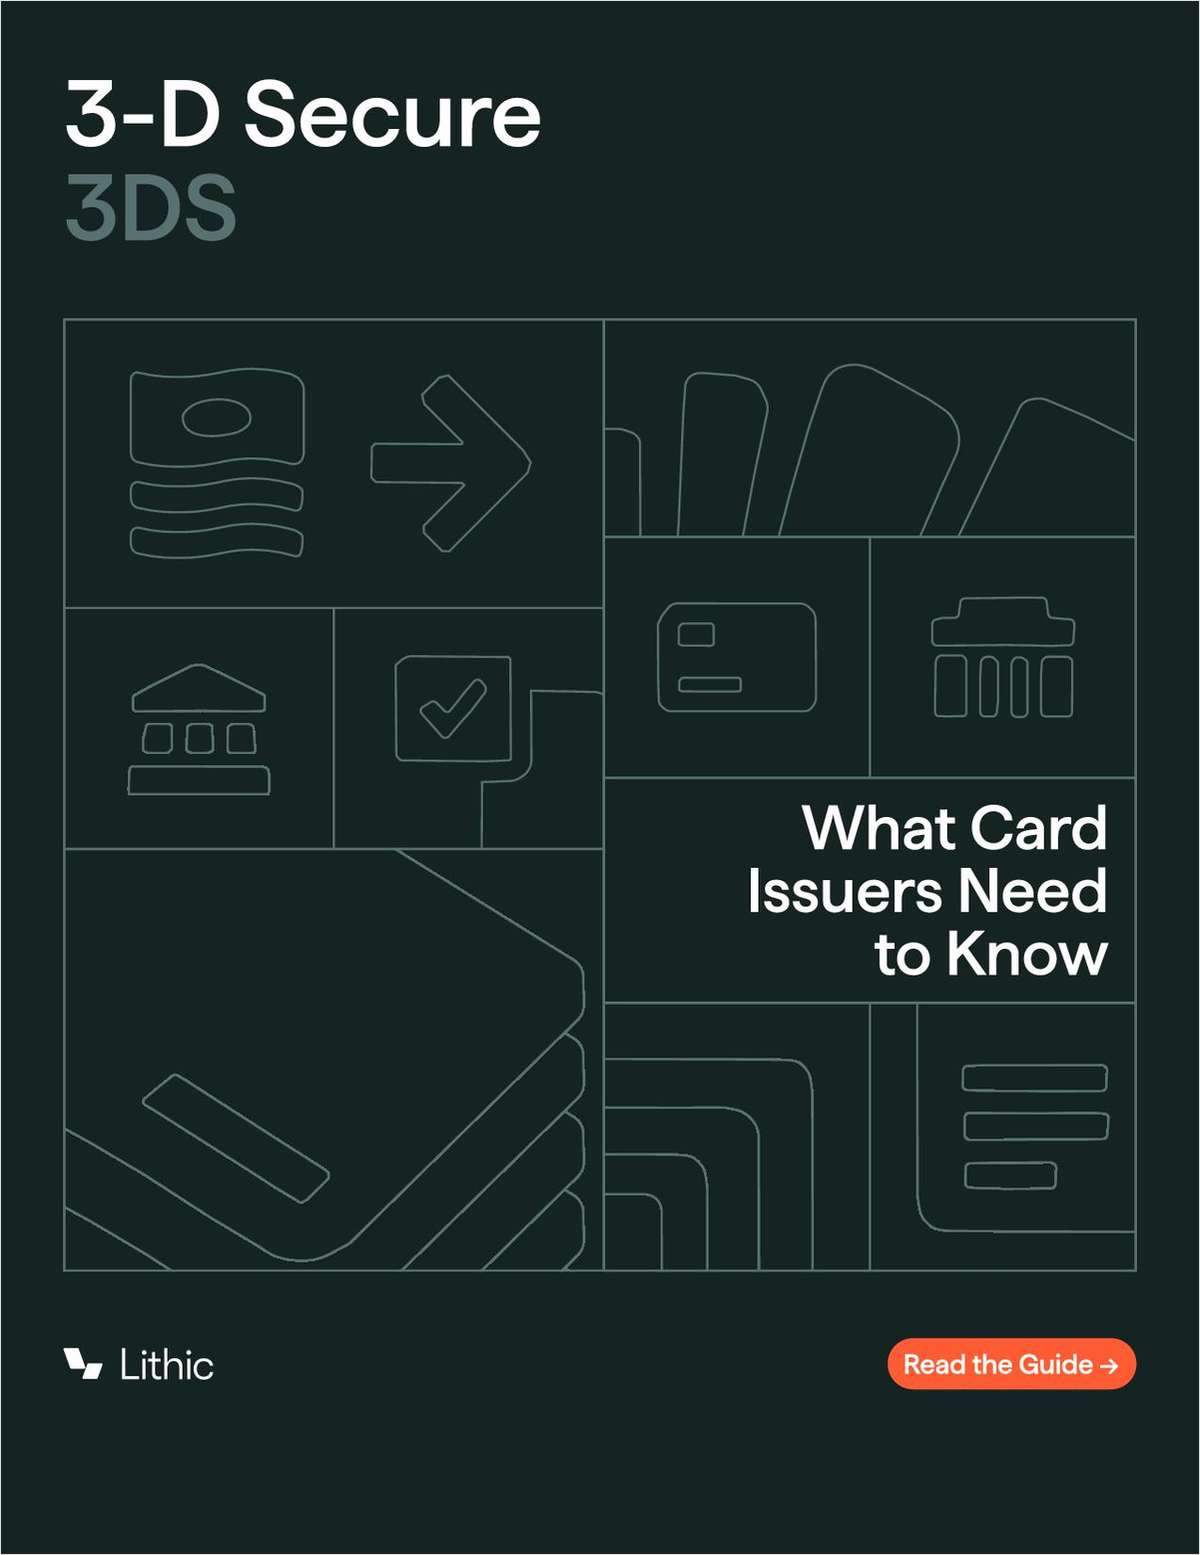 What card issuers need to know about 3DS